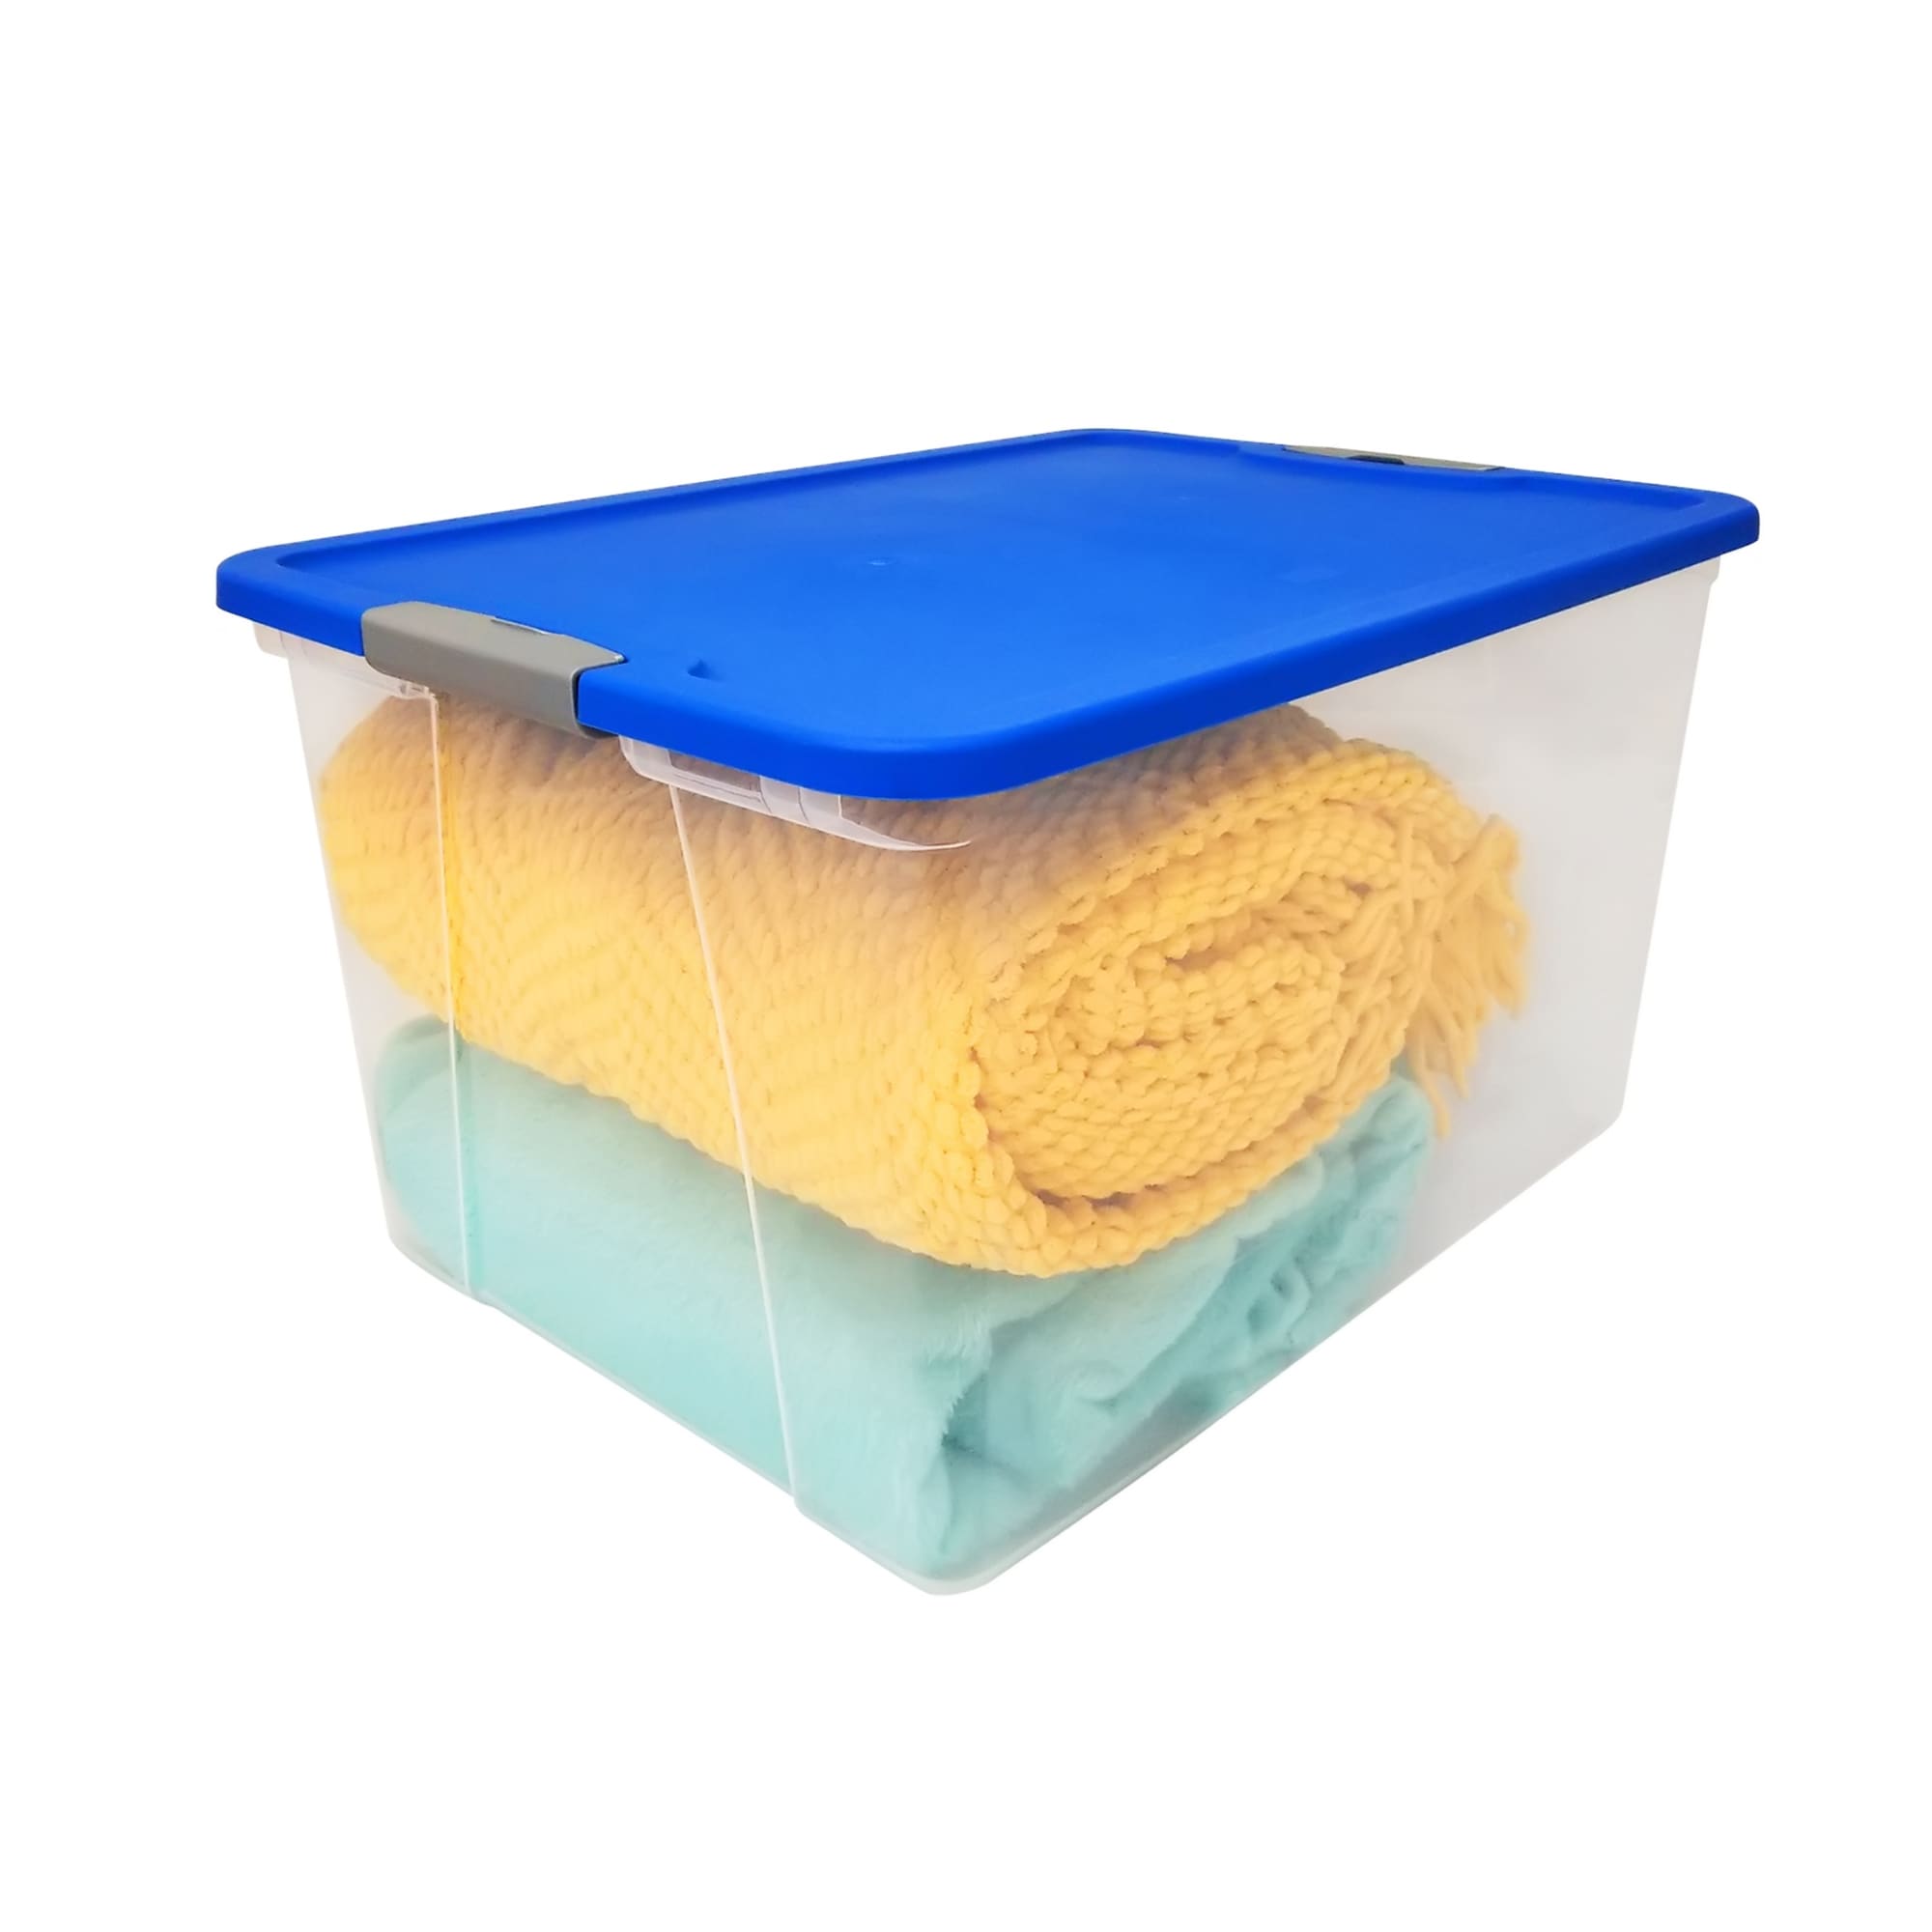 Homz Plastic Wicker Storage Boxes with Lid, Small 